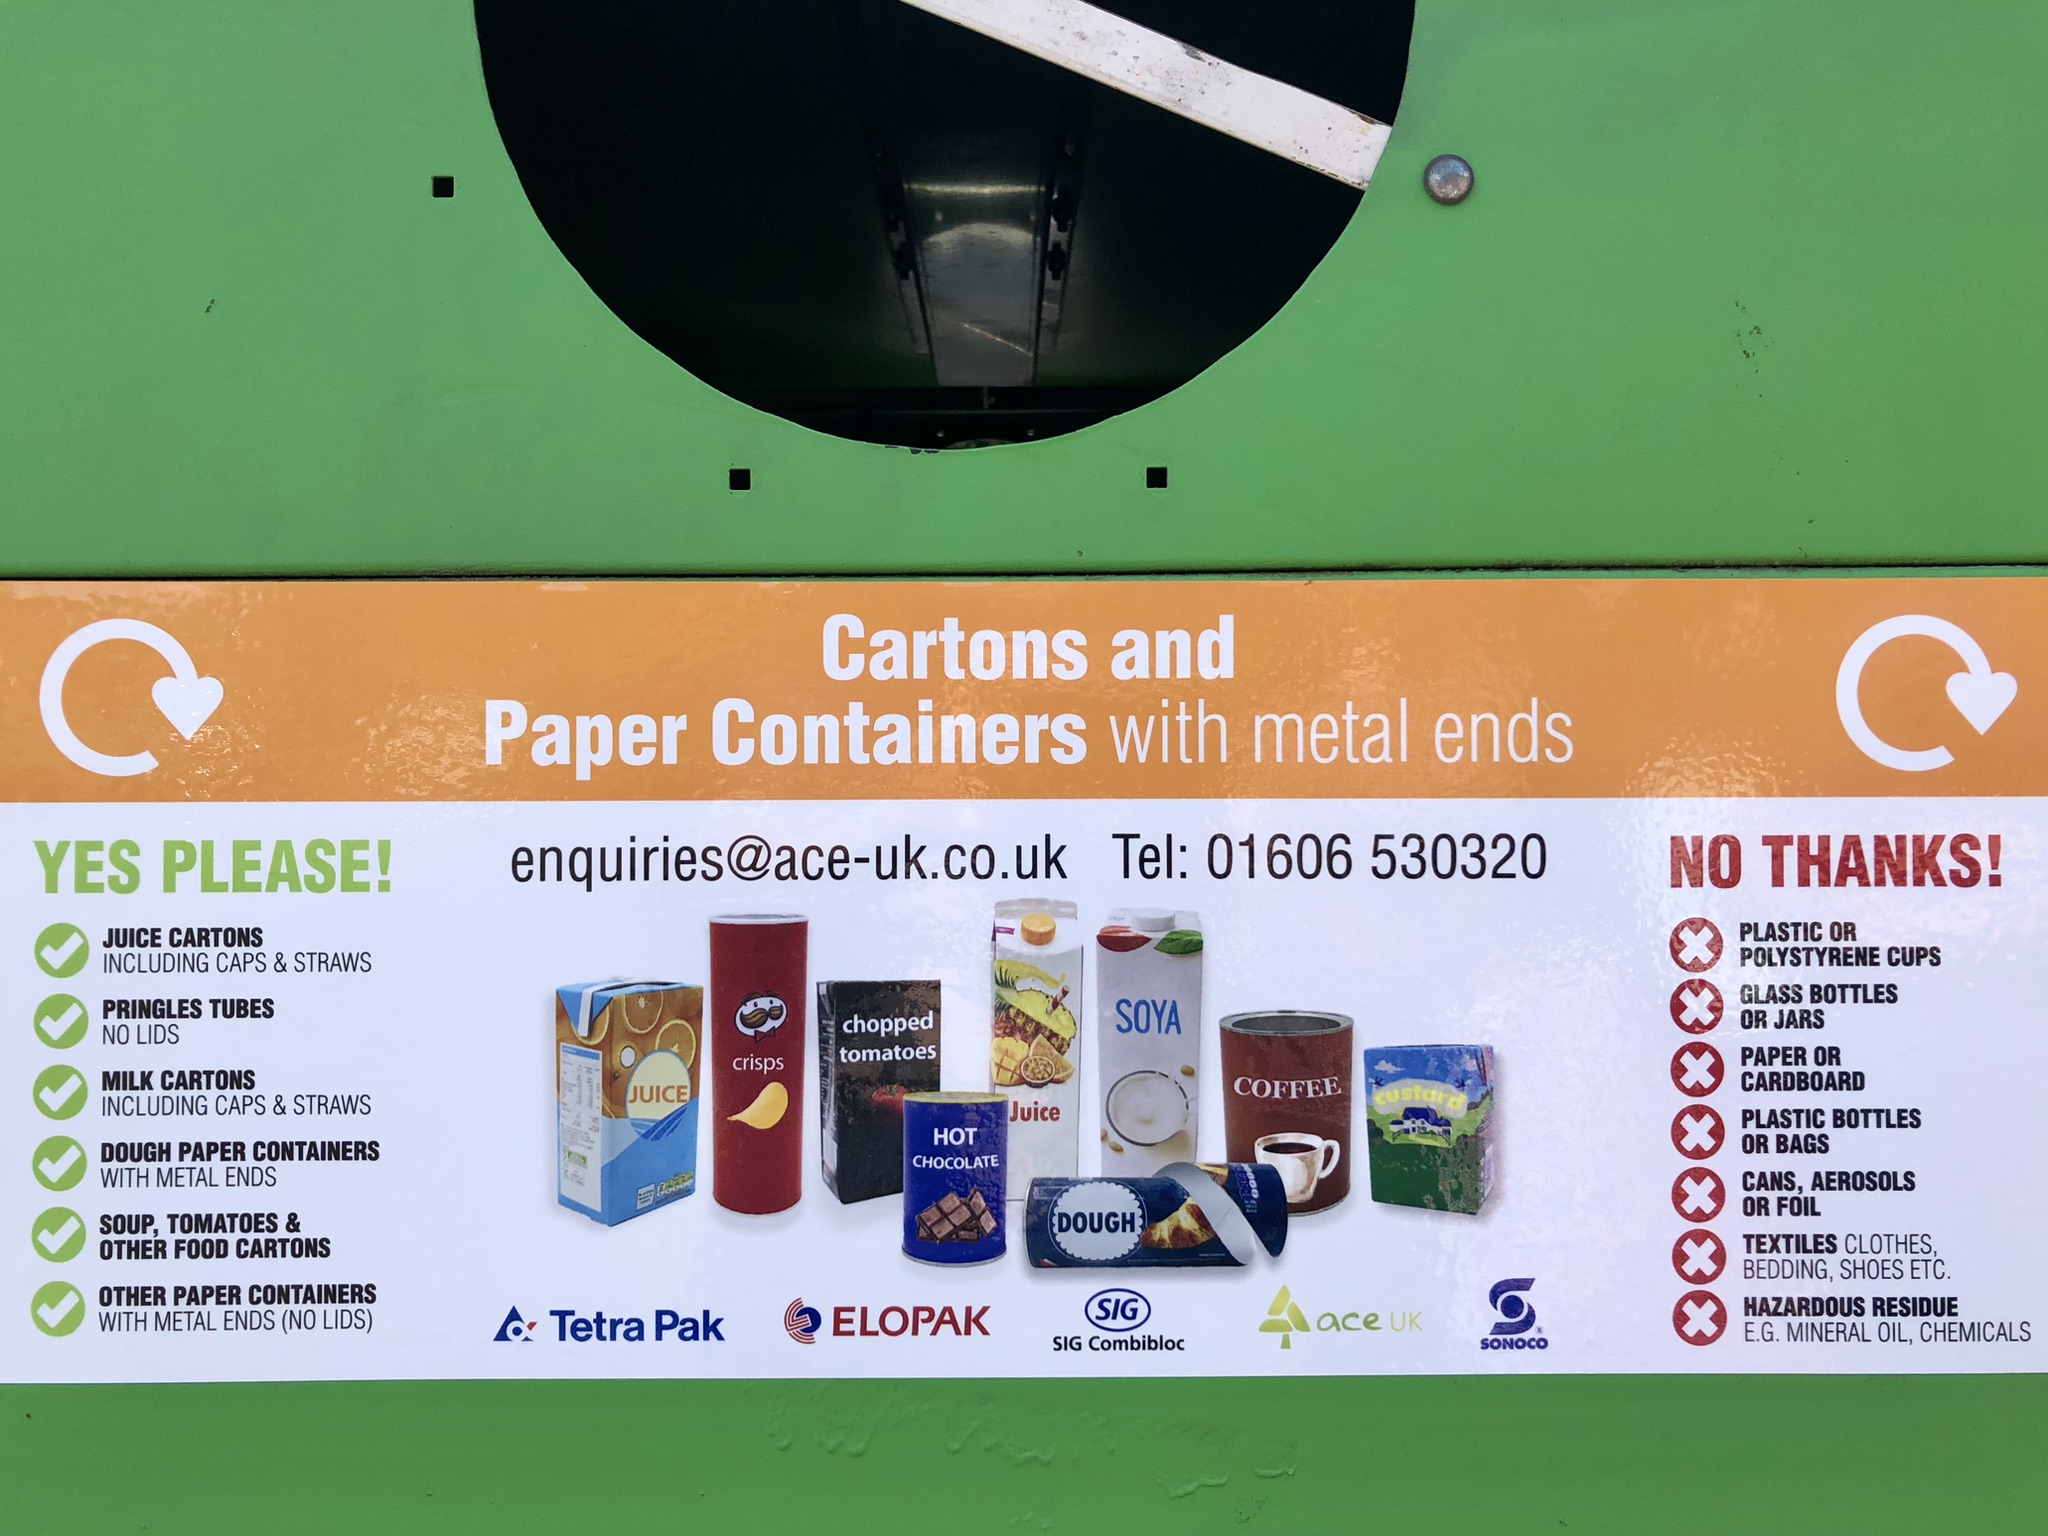 Image of the sticker on the Tetrapak bin showing what types of items can be recycled there